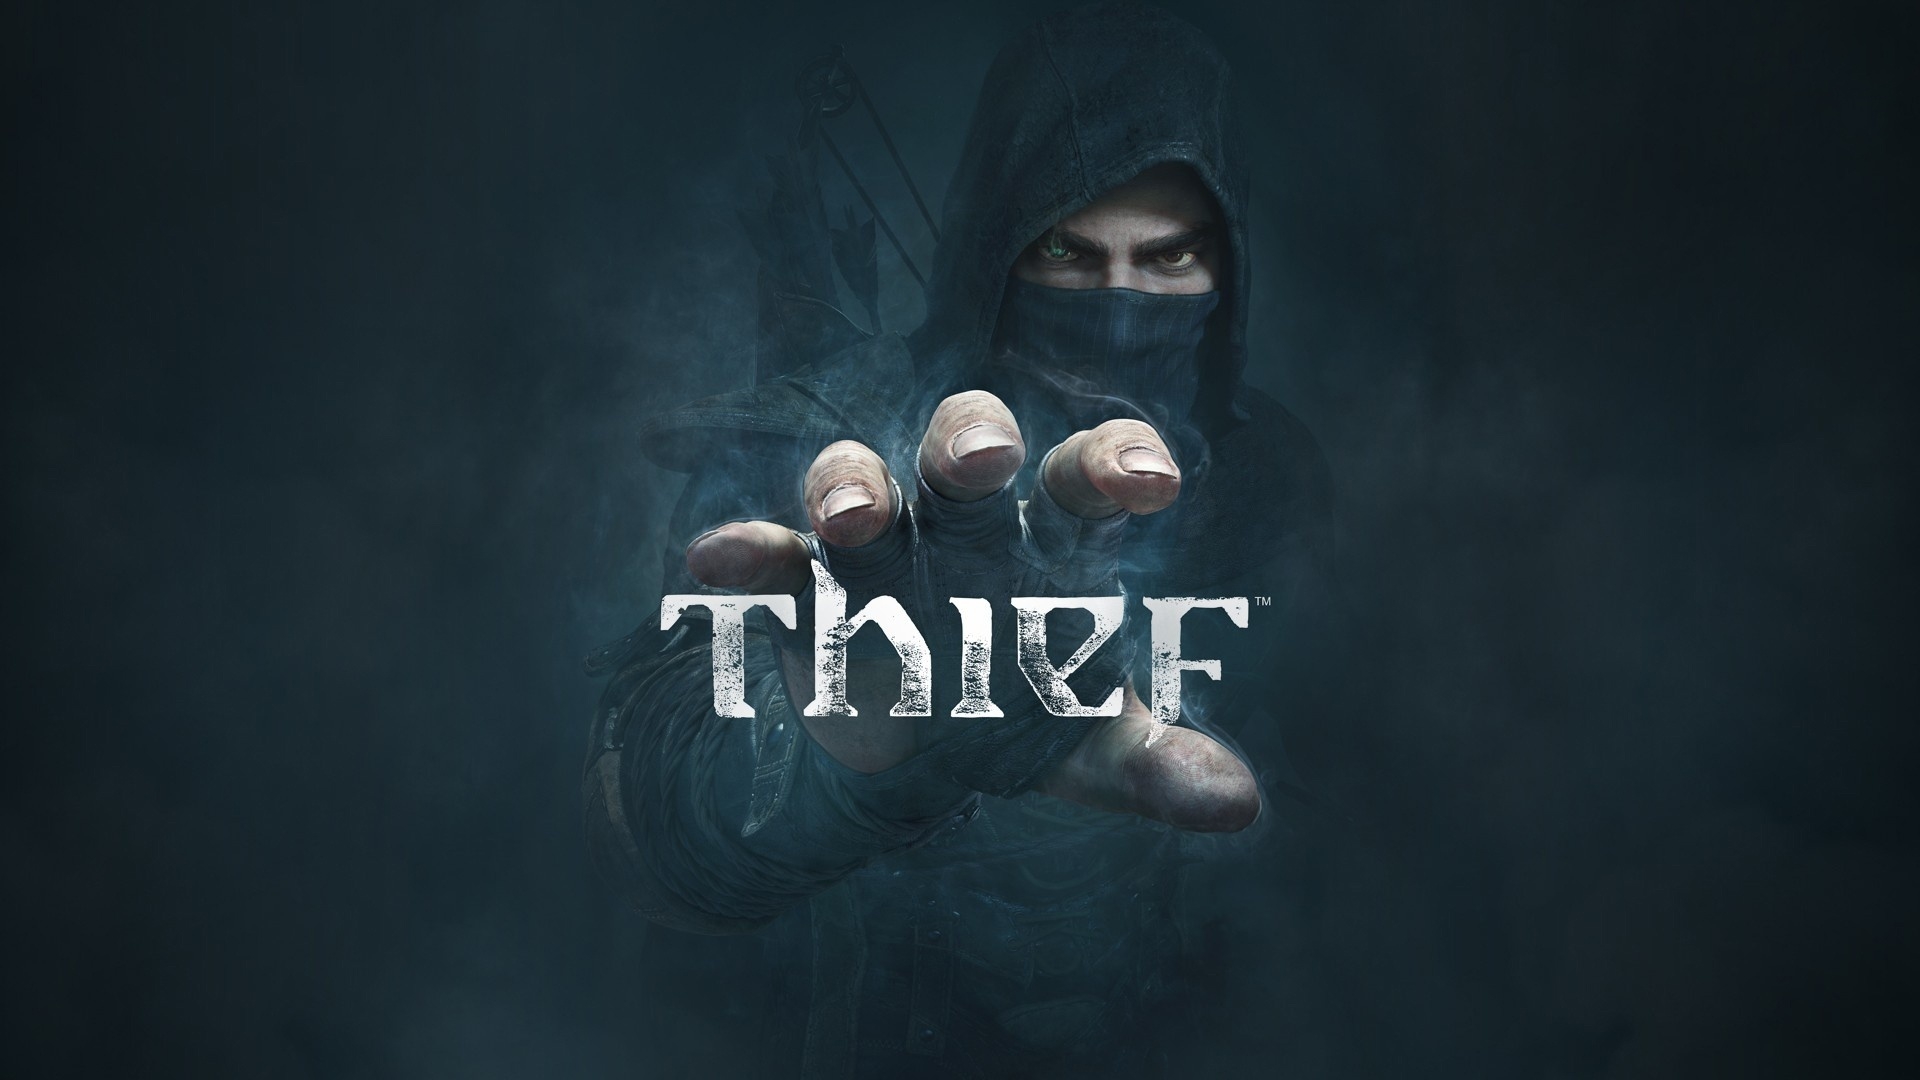 Thief Video Game for 1920 x 1080 HDTV 1080p resolution